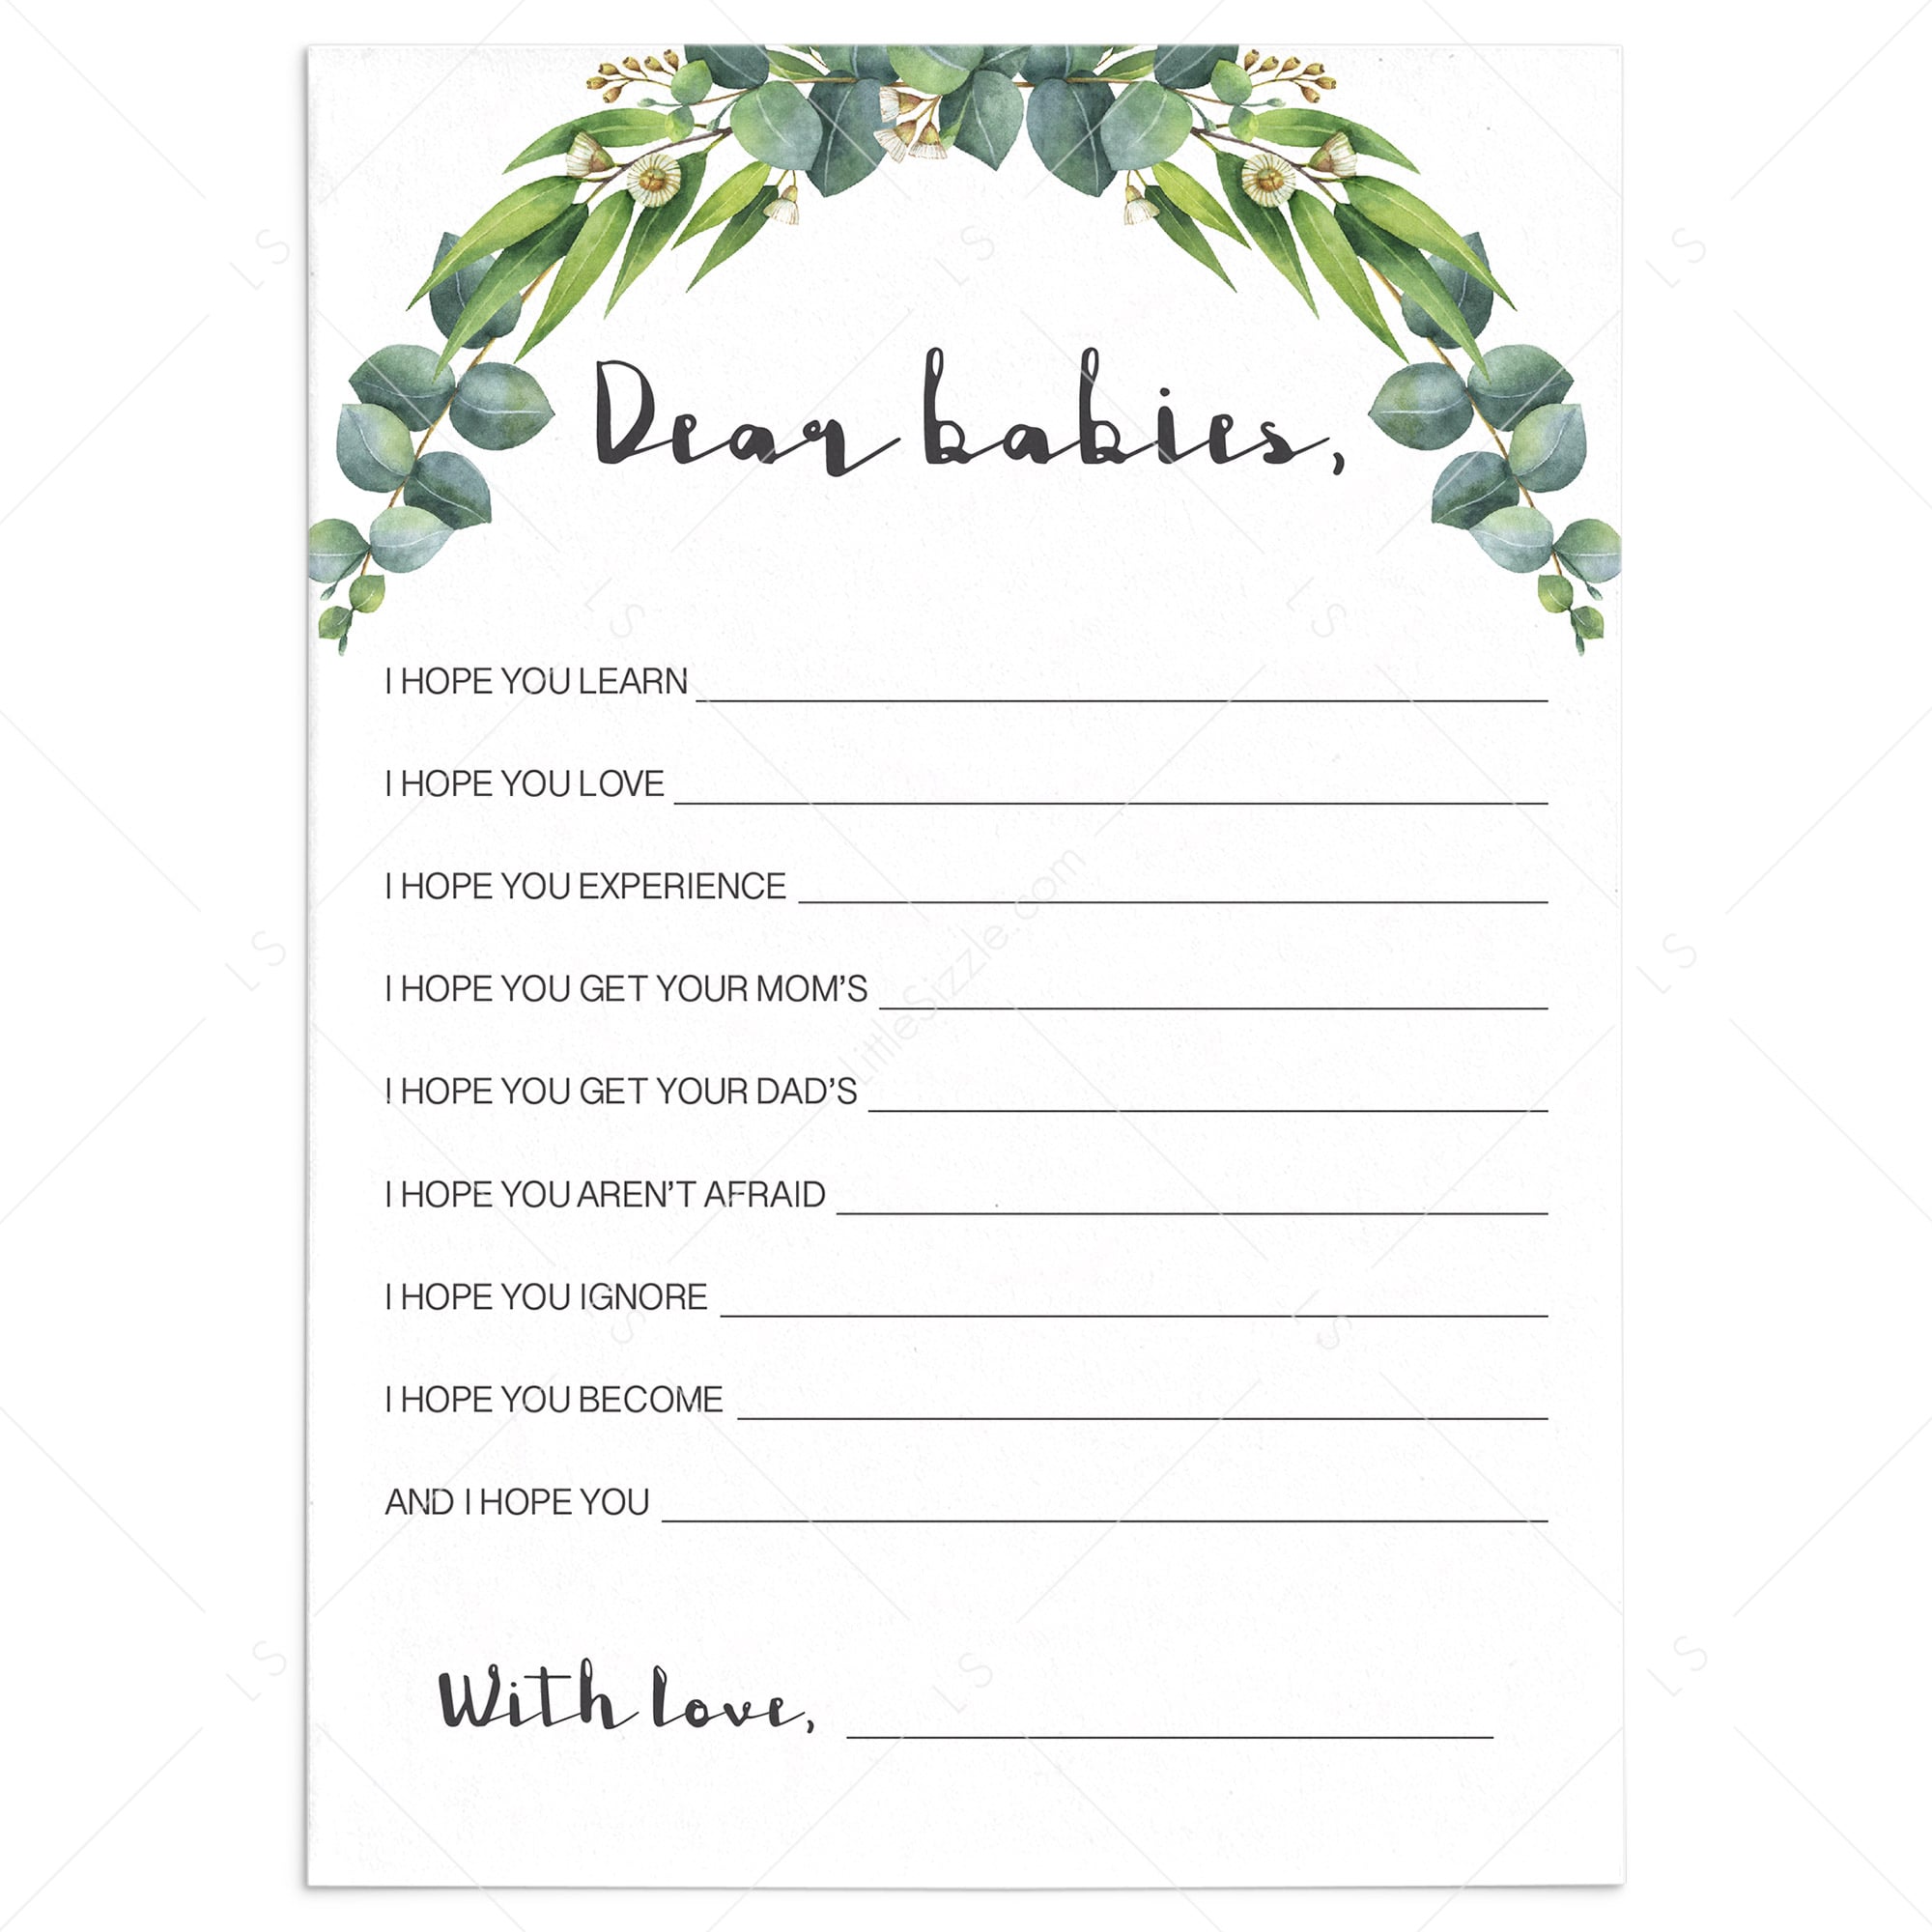 Wishes for baby twins baby shower game printable by LittleSizzle